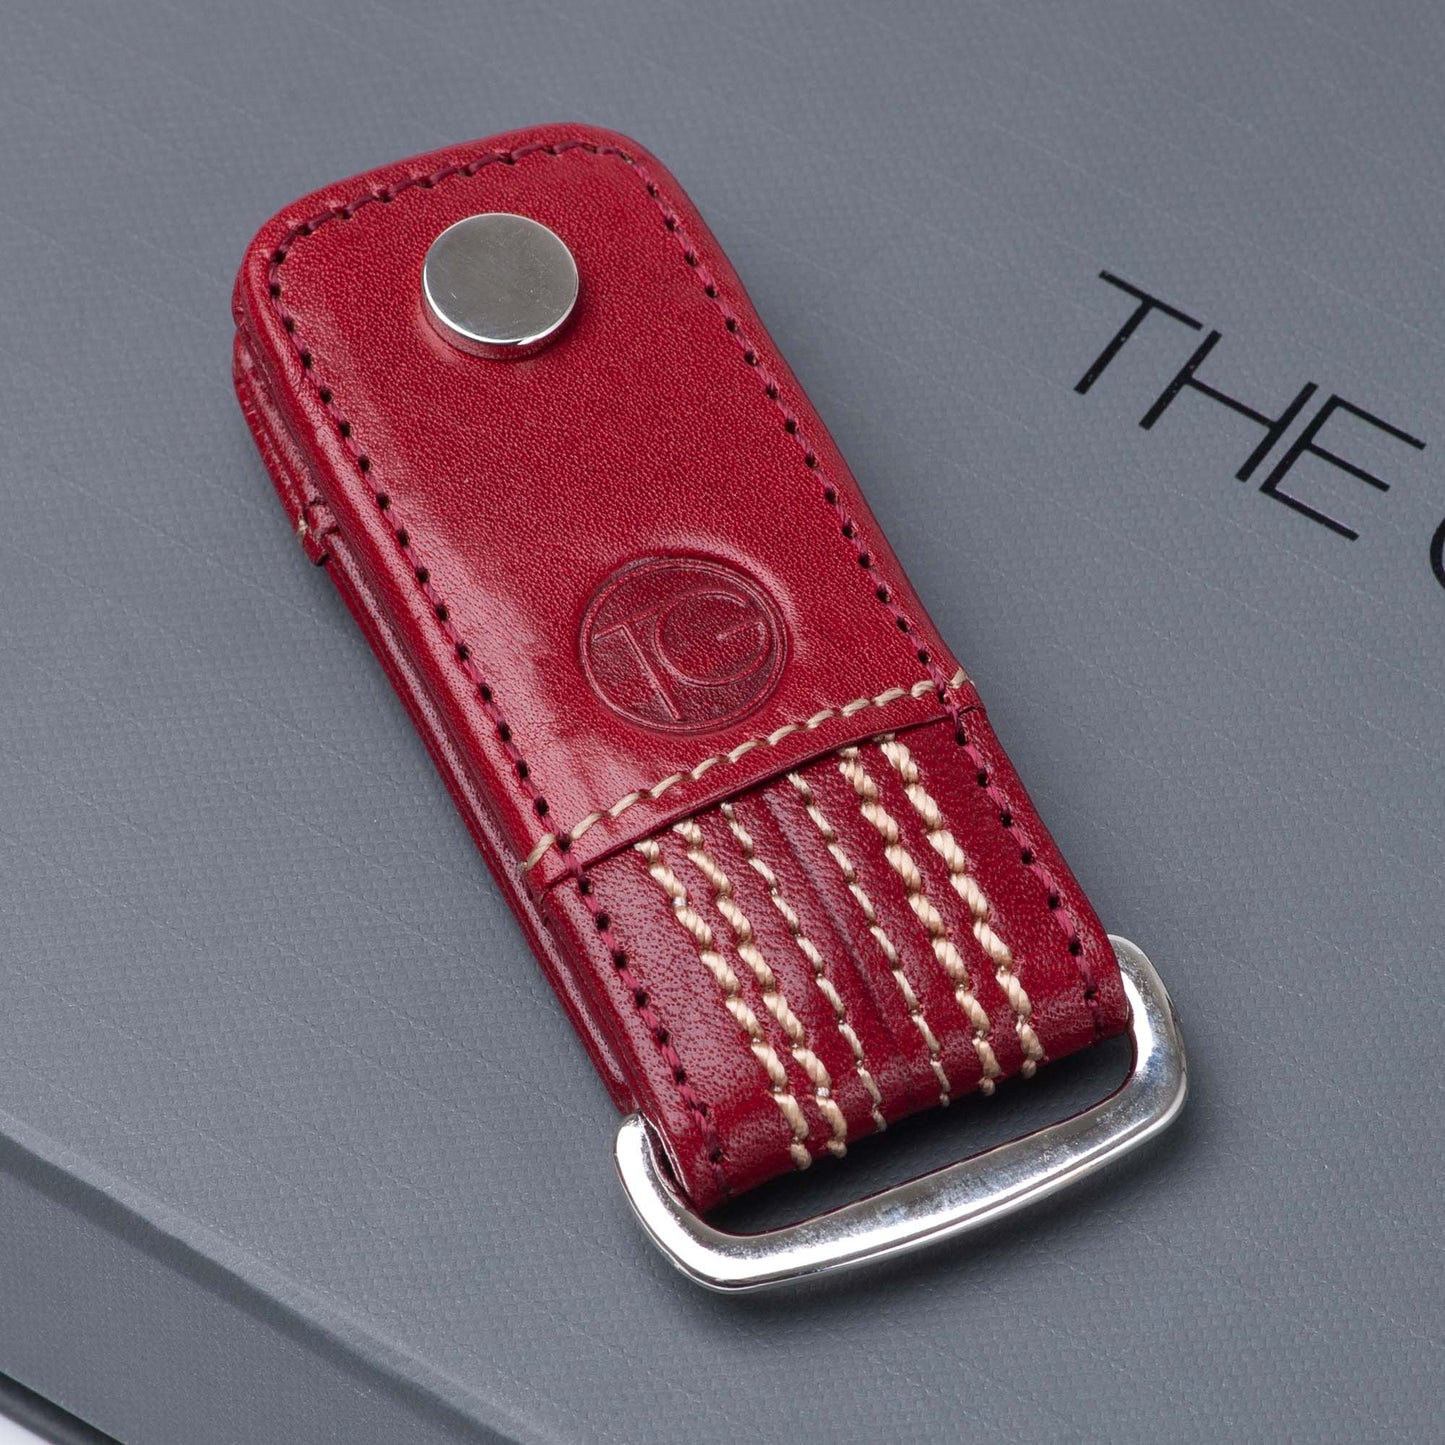 The Game -The Inswinger Keyring -Cherry